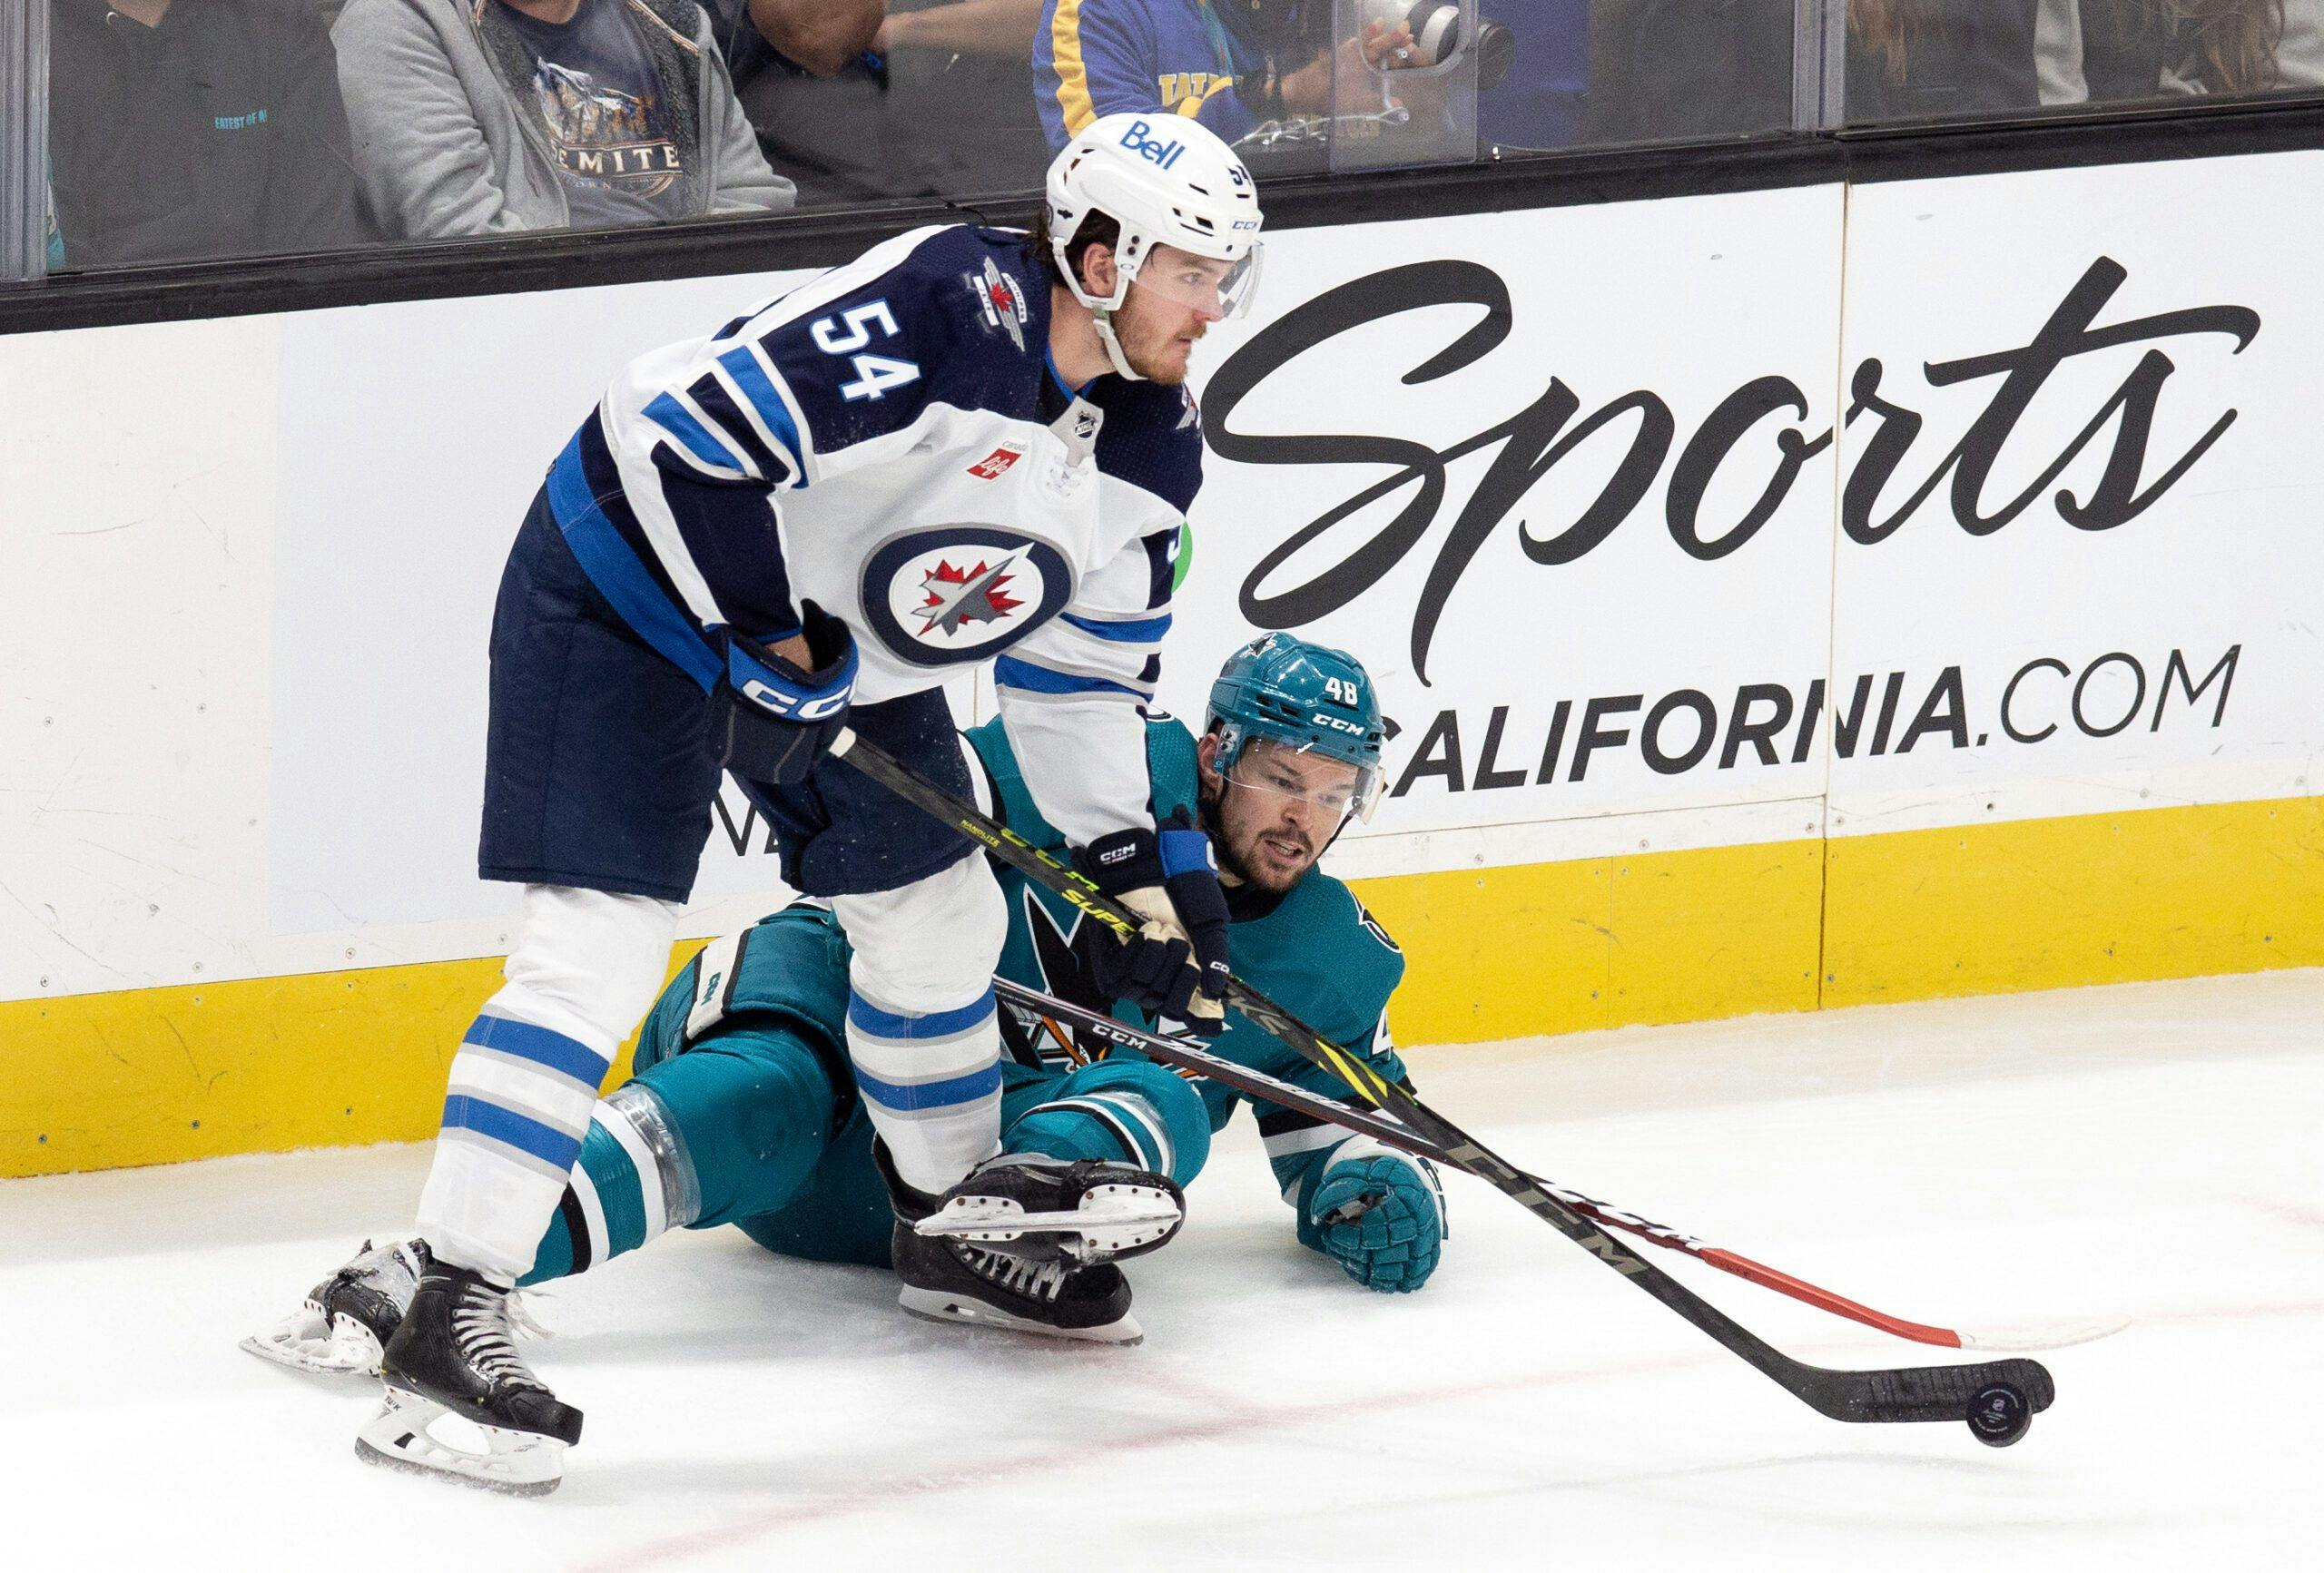 Morgan Barron signs two-year deal with Winnipeg Jets after career season